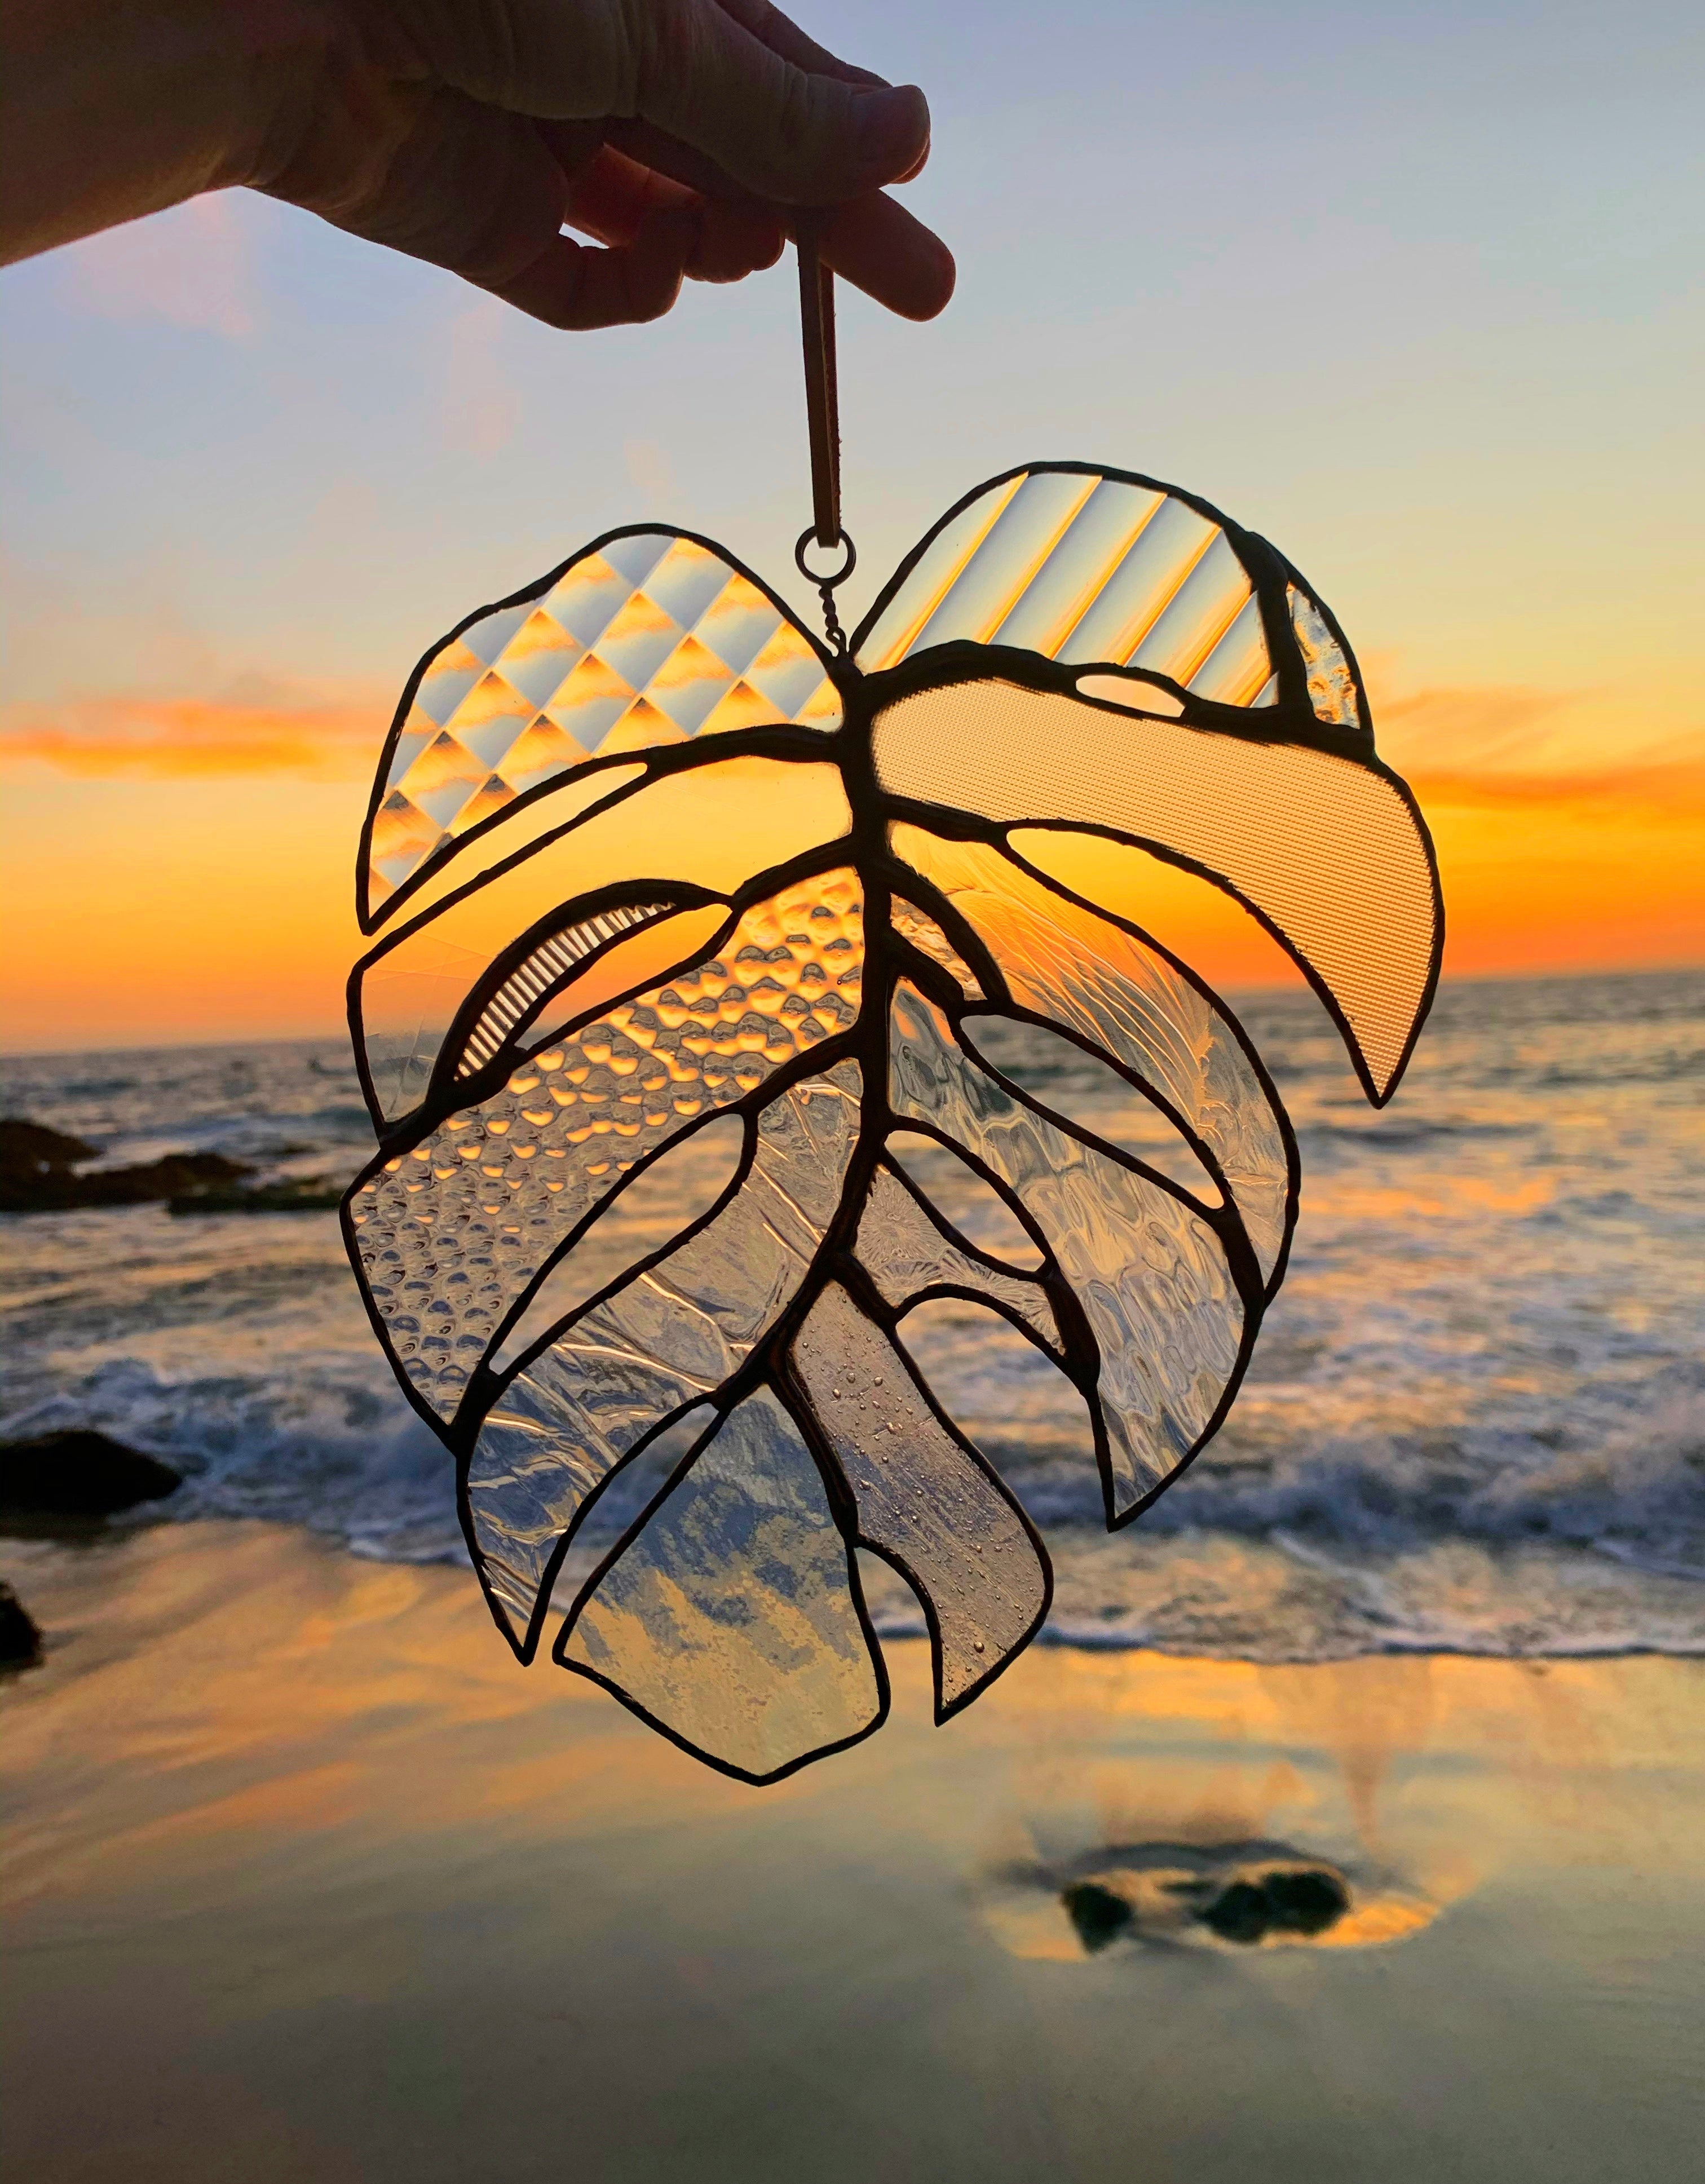 Stained glass leaf with clear glass and a beach in the background